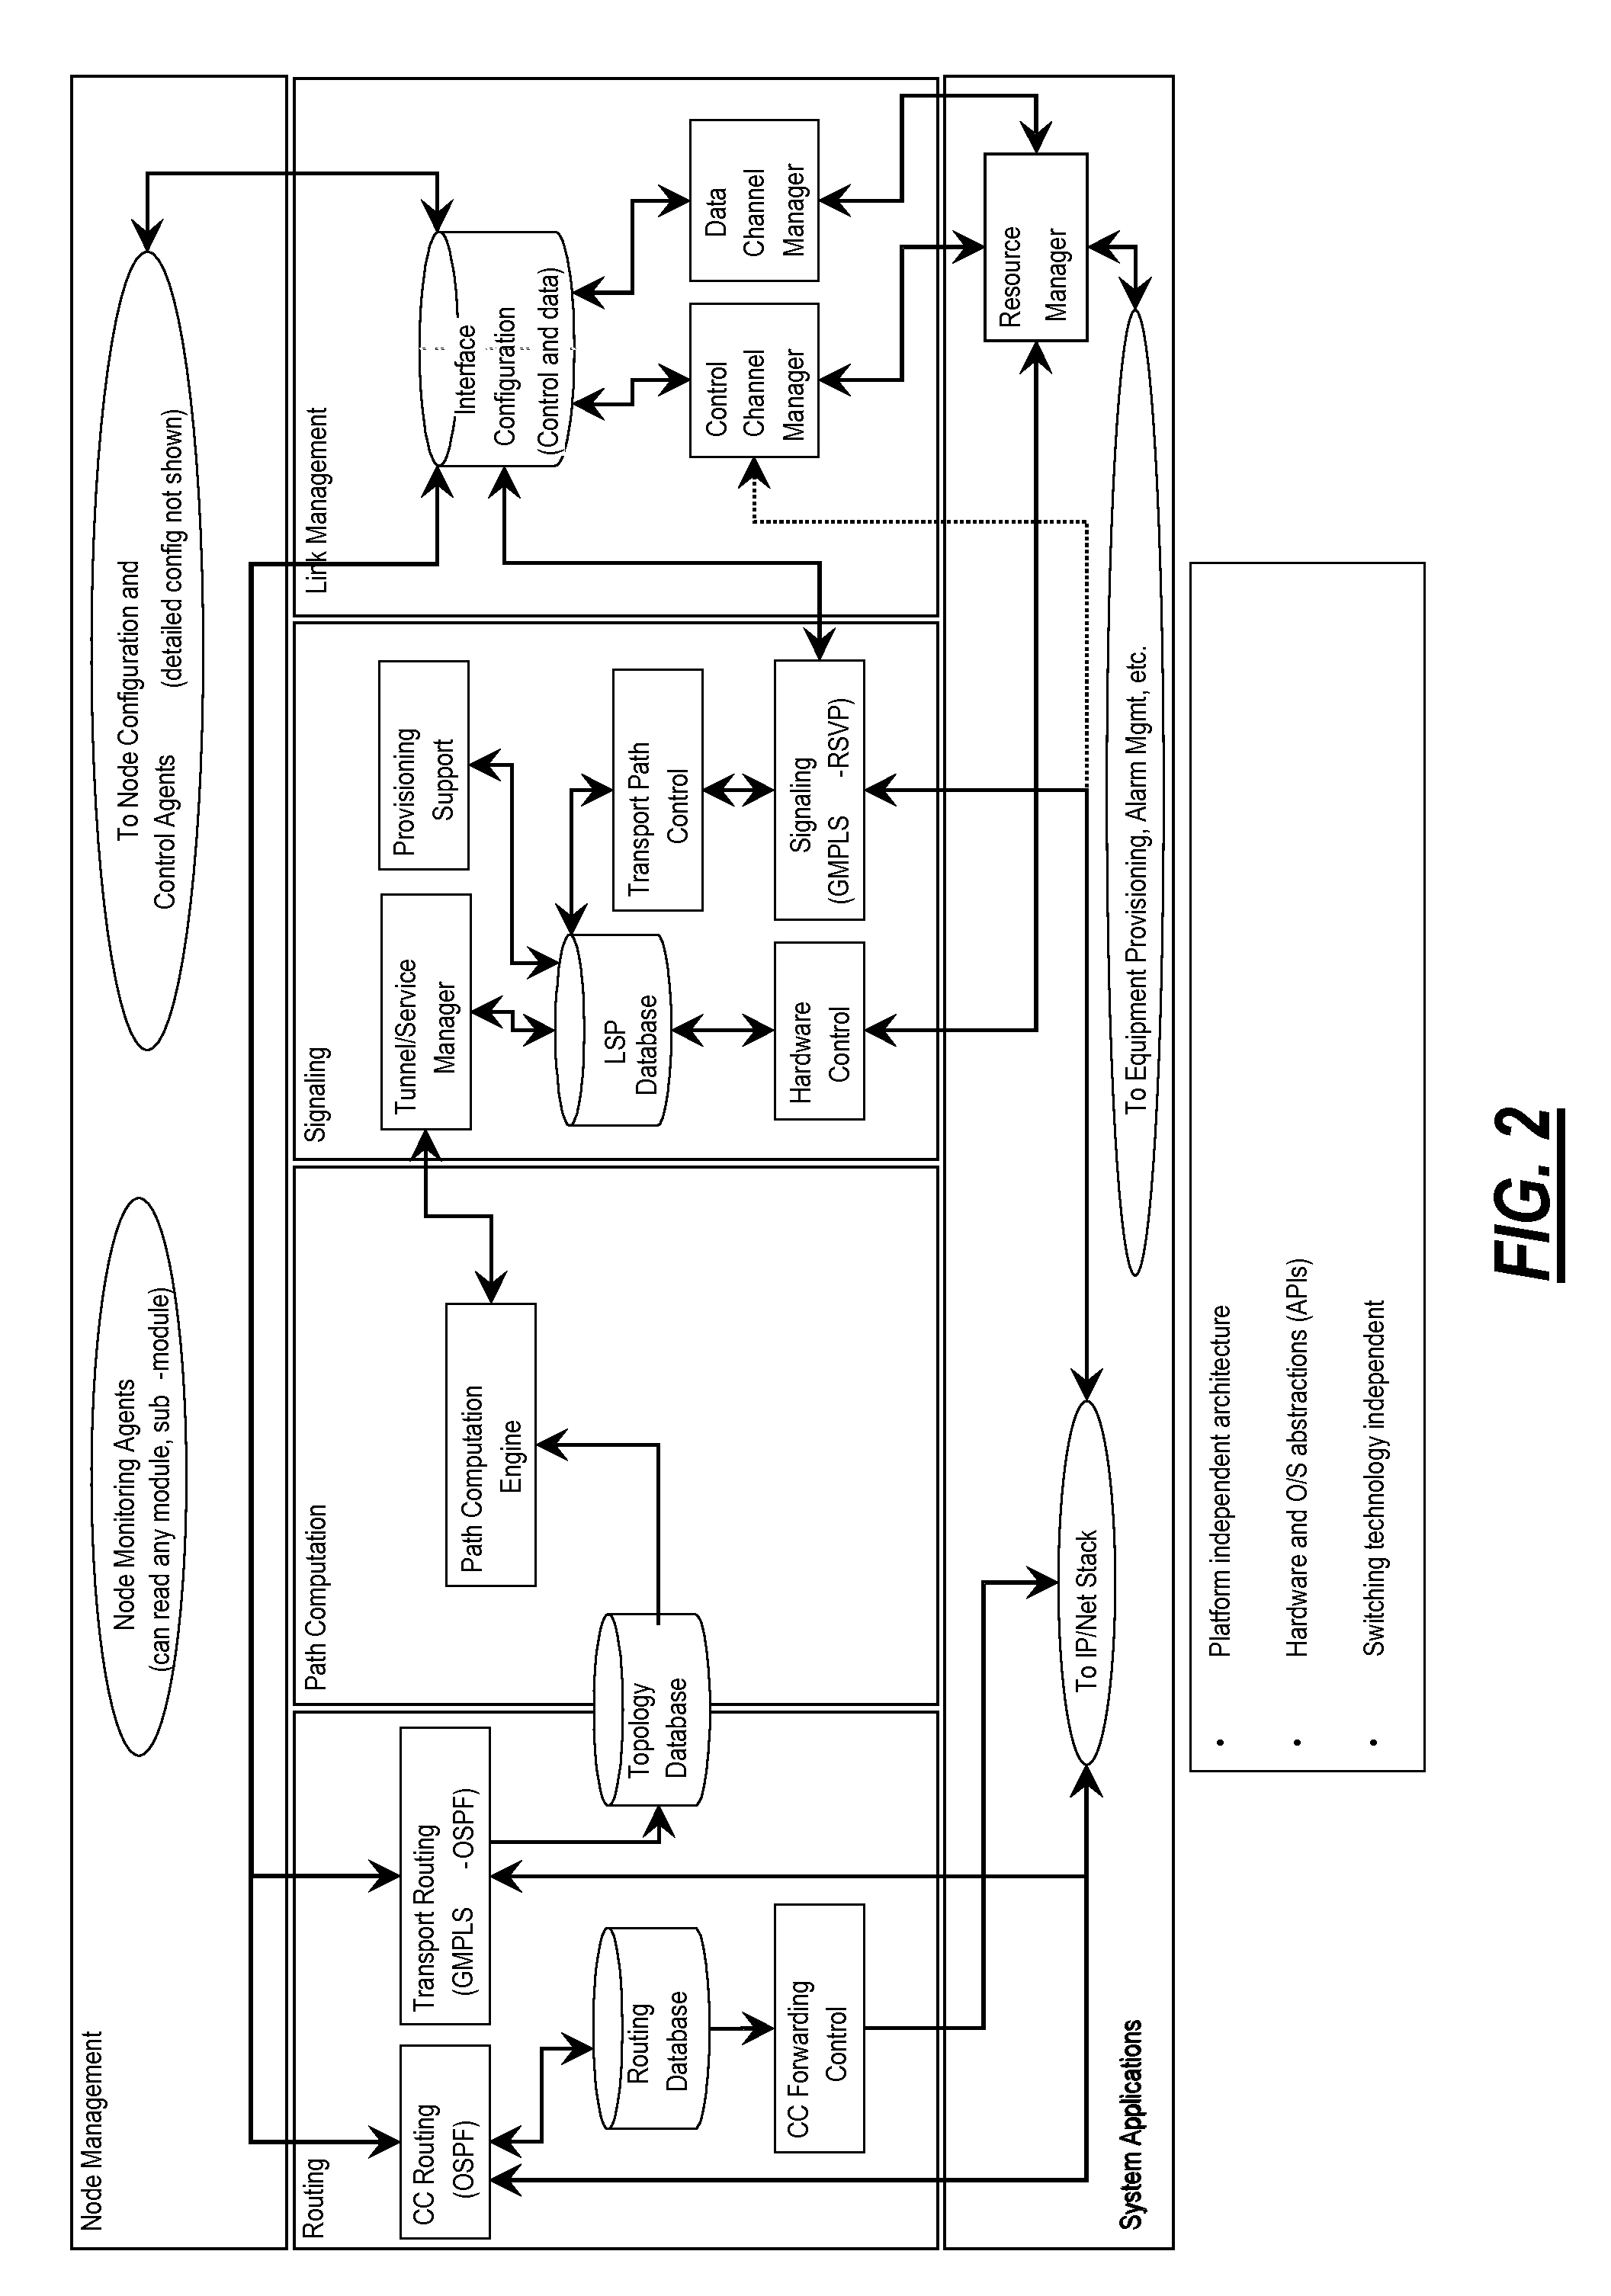 Dynamic performance monitoring systems and methods for optical networks